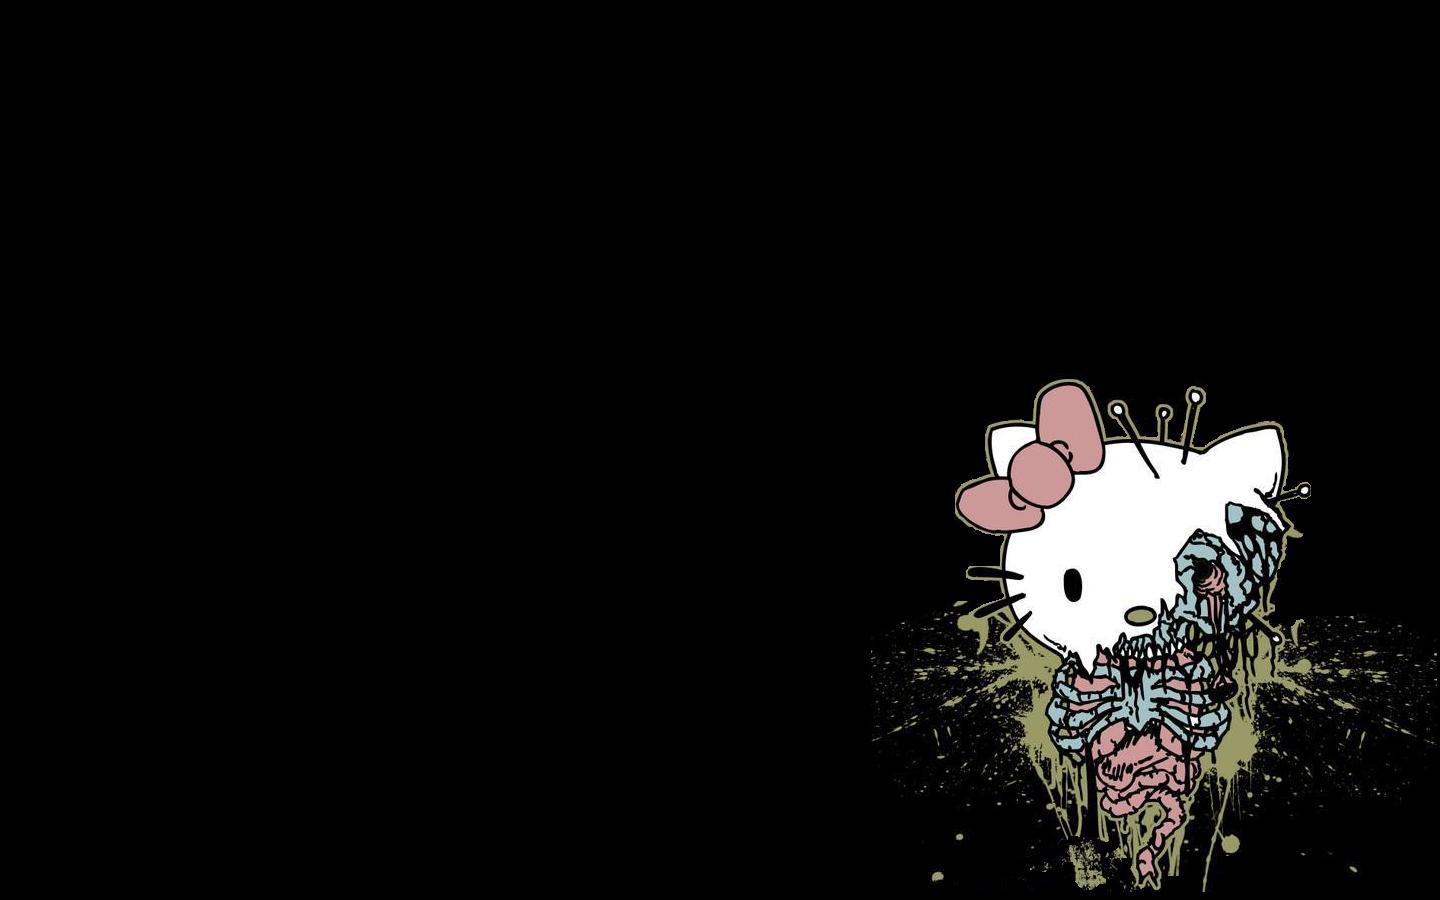 High Definition  Wallpapers on Hello Kitty Black Background Hd Wallpaper   General   399978